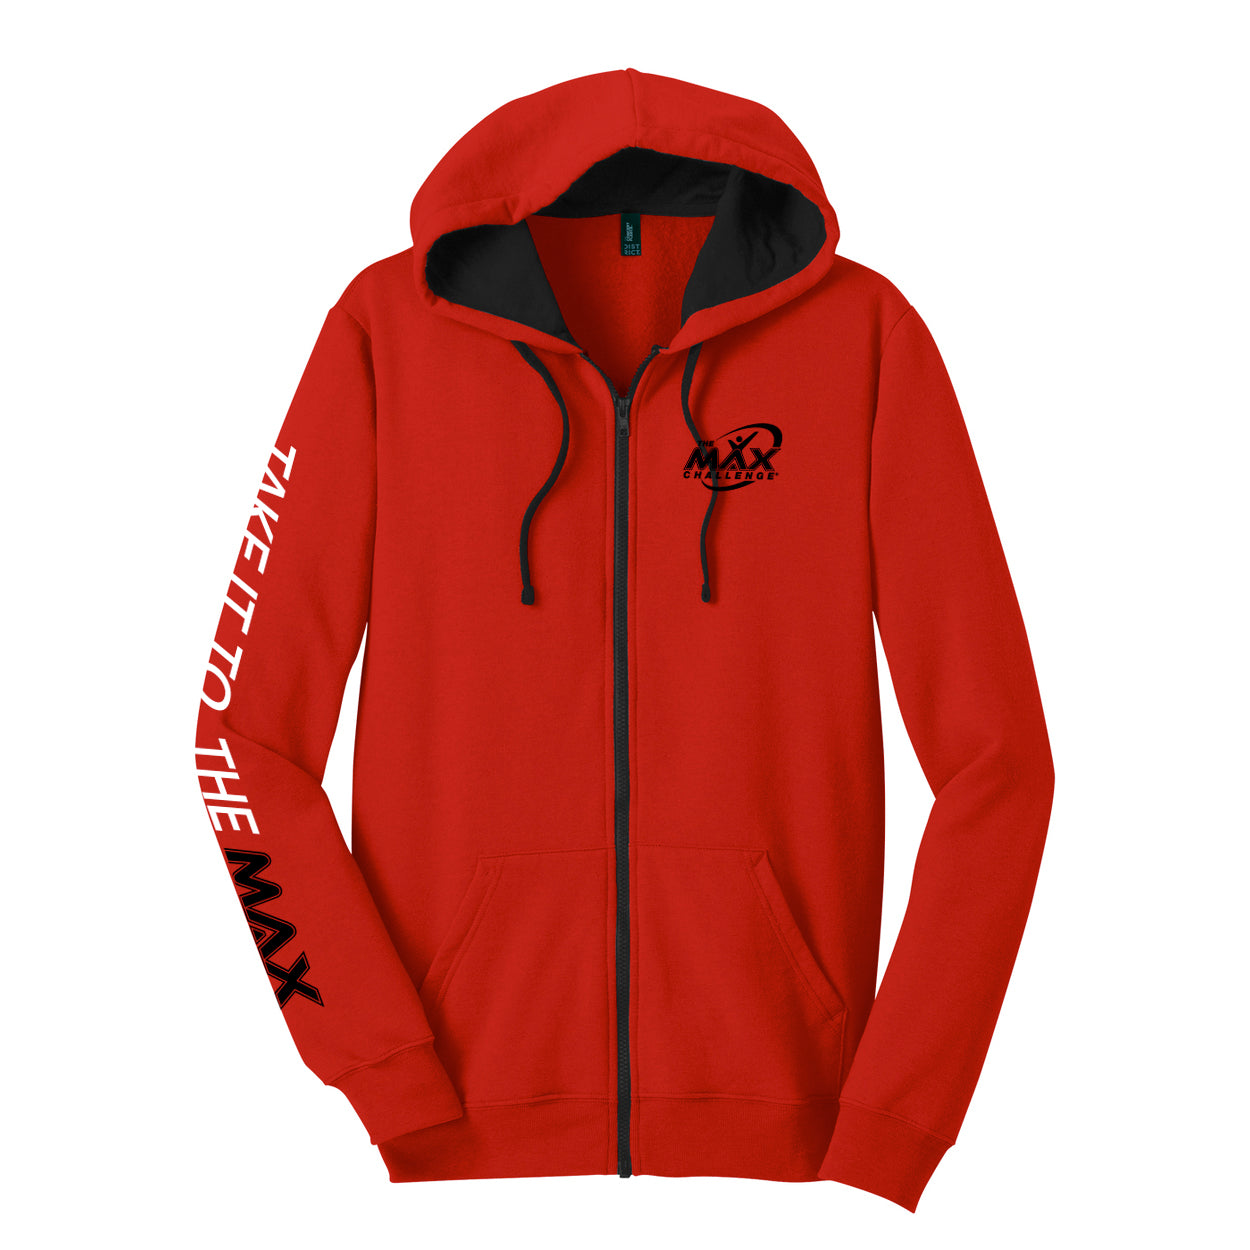 Unisex "Take it to THE MAX" Zip-Up Hoodie